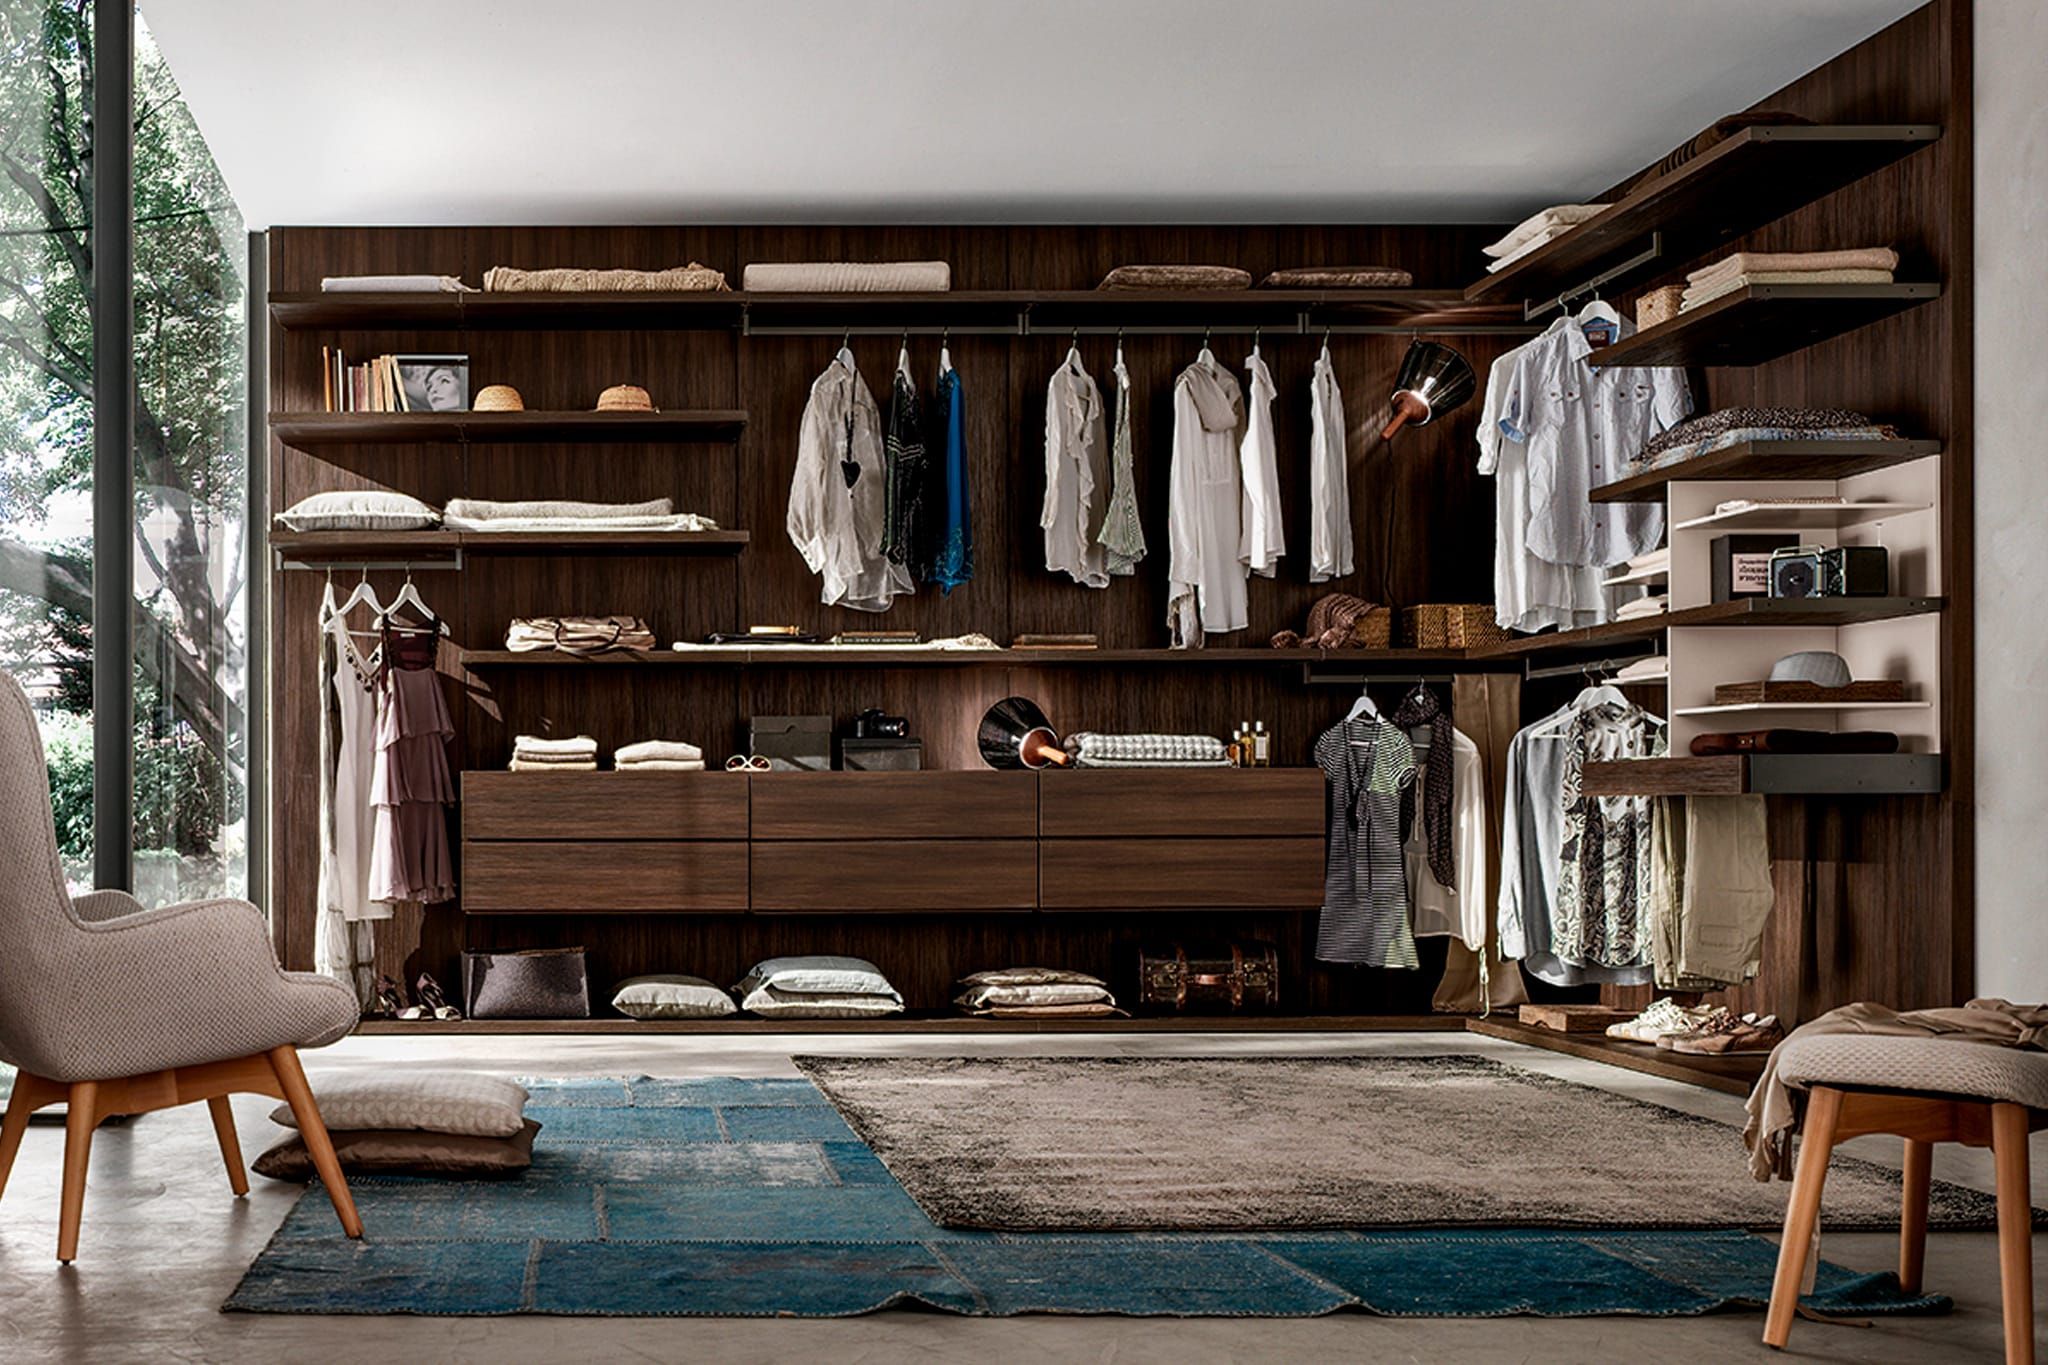 3 Ideas For Designing Your Walk In Wardrobe With K Obi – Santalucia With Regard To Wardrobes Hangers Storages (View 9 of 15)